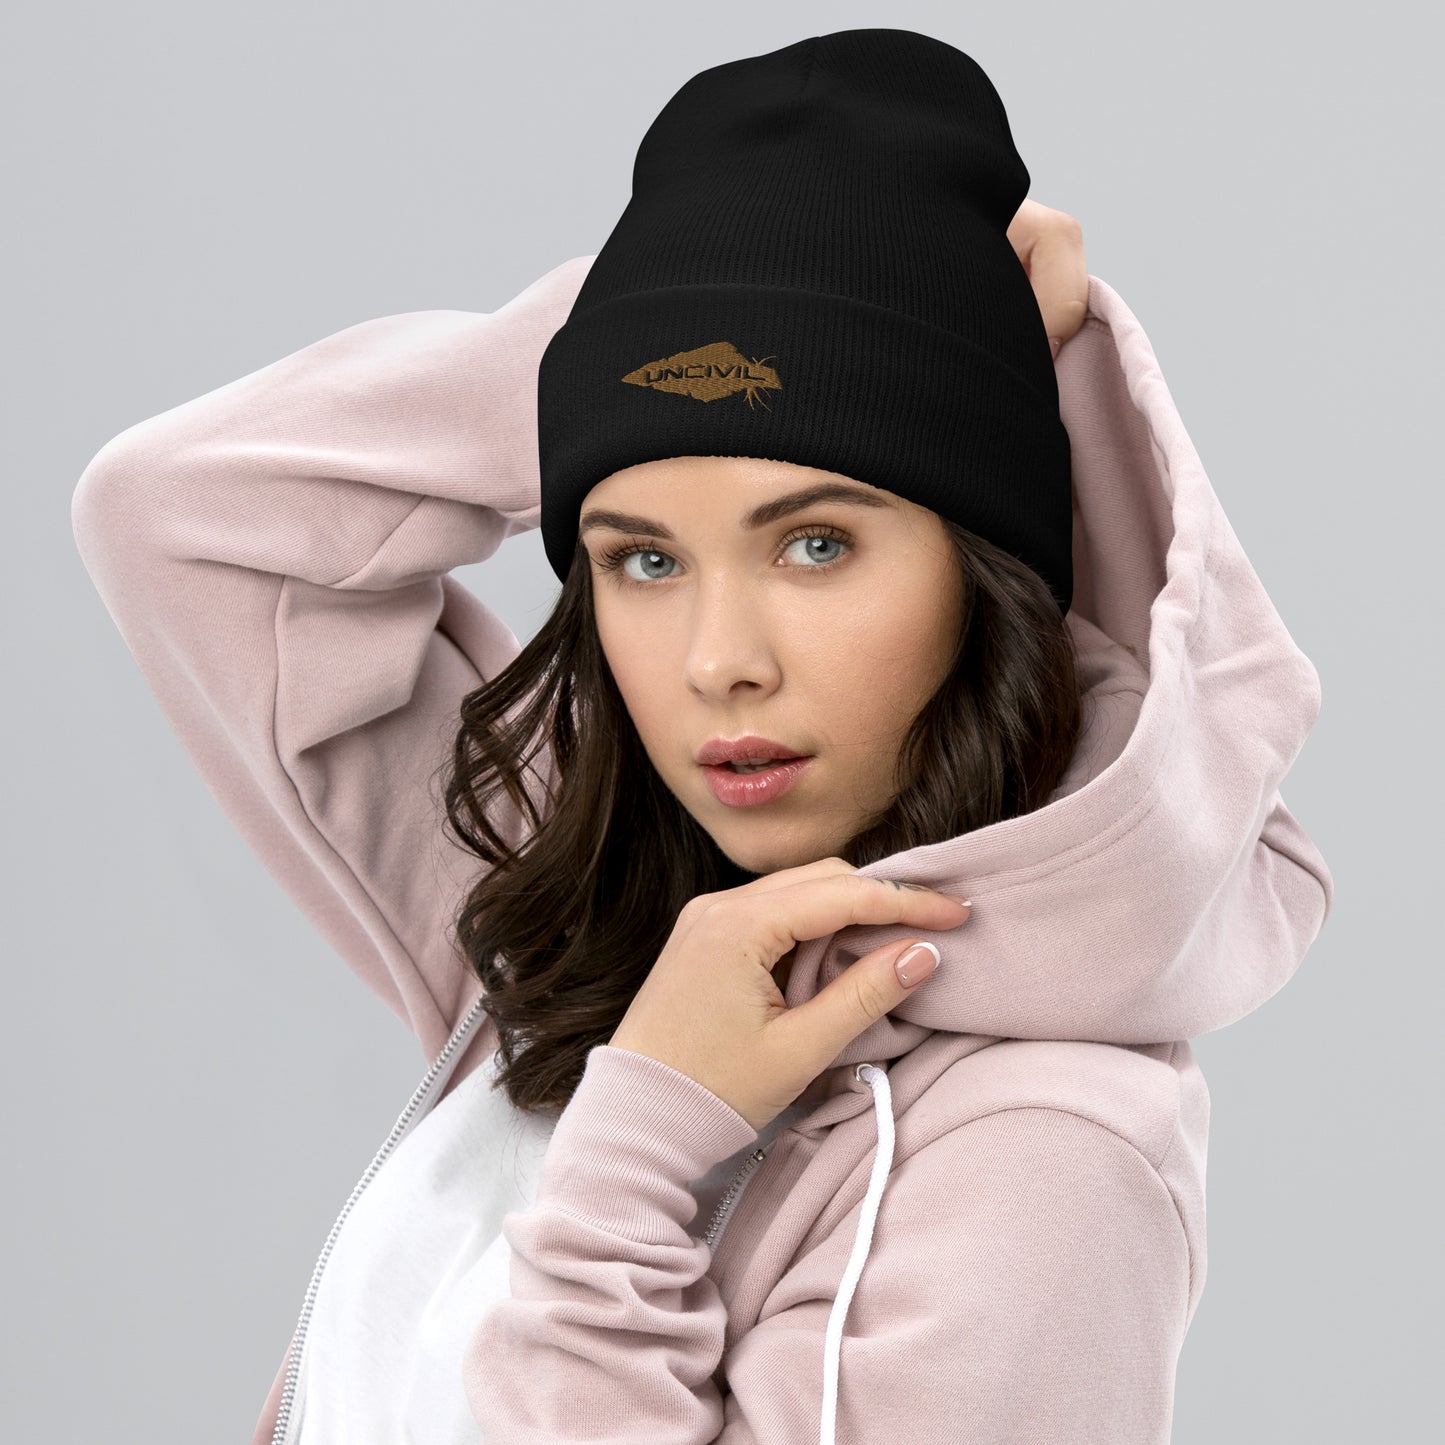 Our UNCIVIL Gold cuffed beanie is a snug, form-fitting beanie for men or women. Offered in Black with our Gold UNCIVIL Spear. 